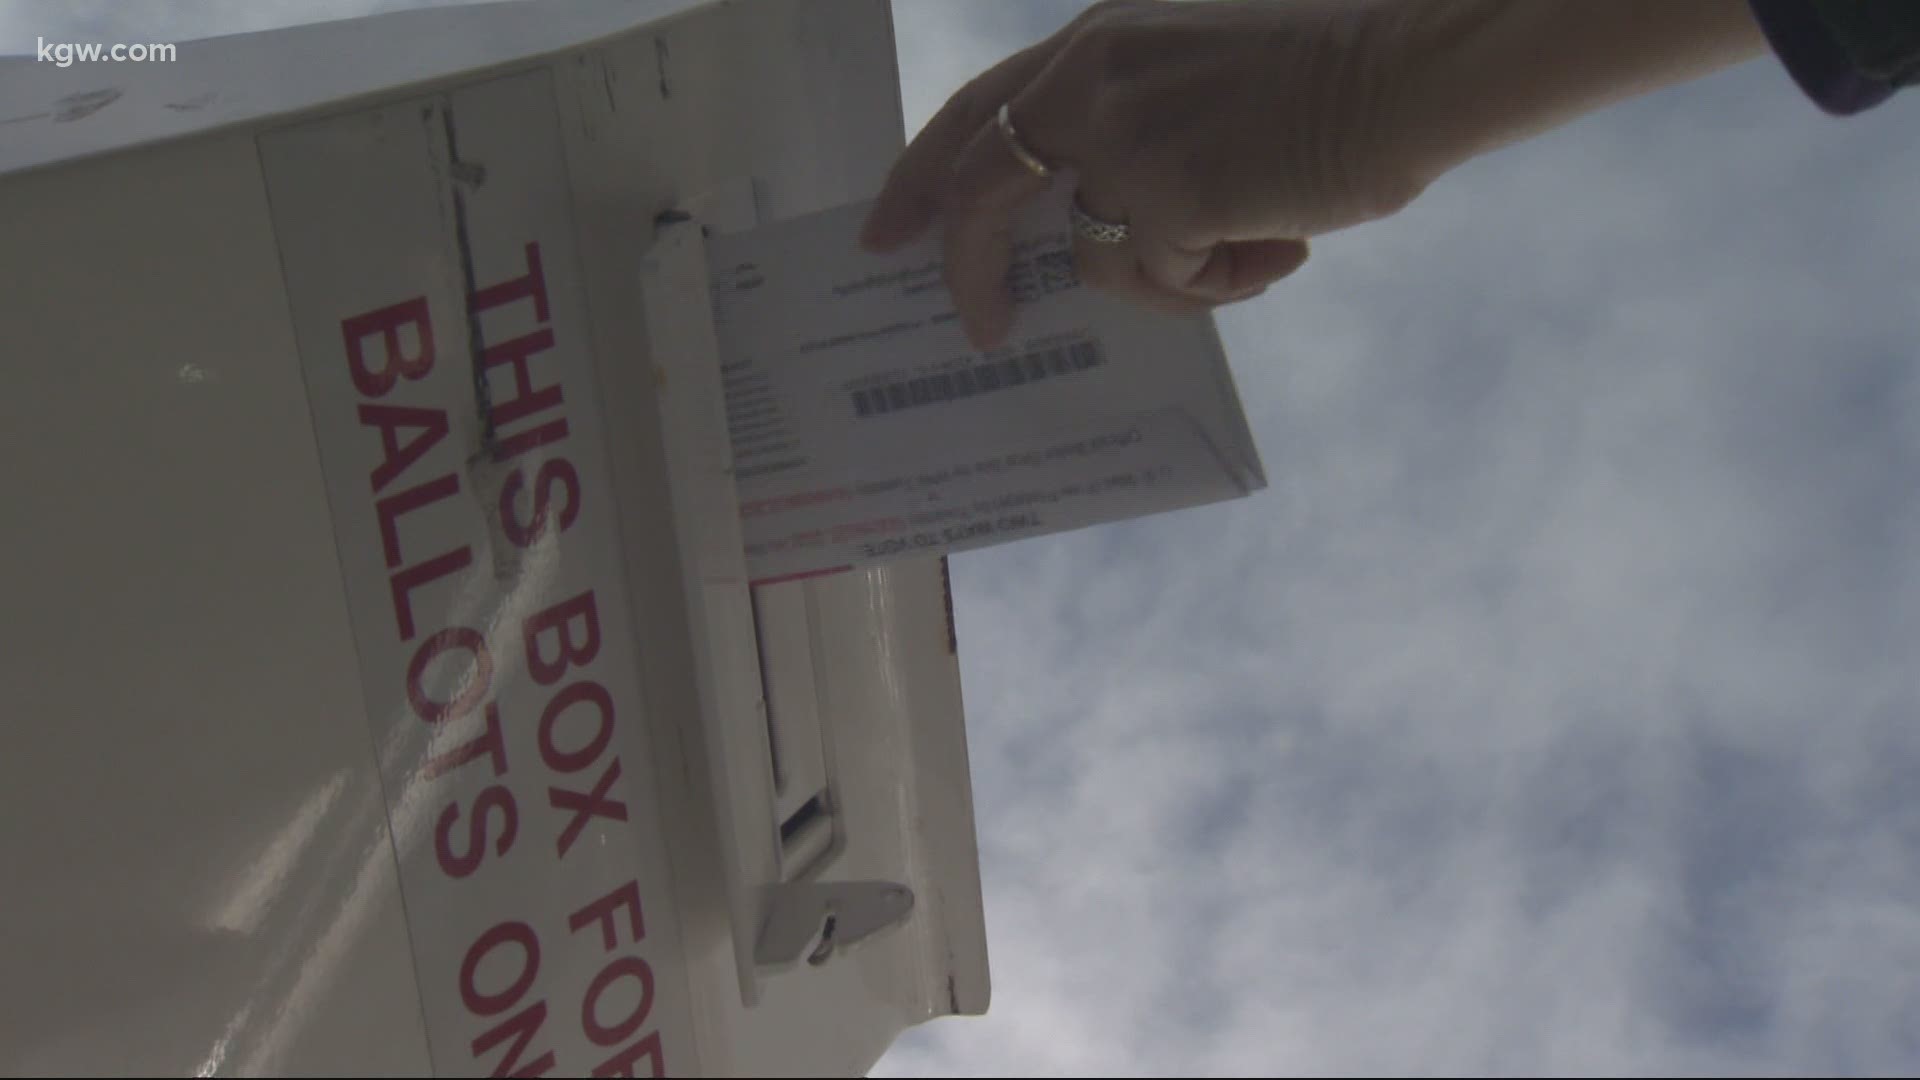 Are some voters getting two ballots? Kyle Iboshi verifies.